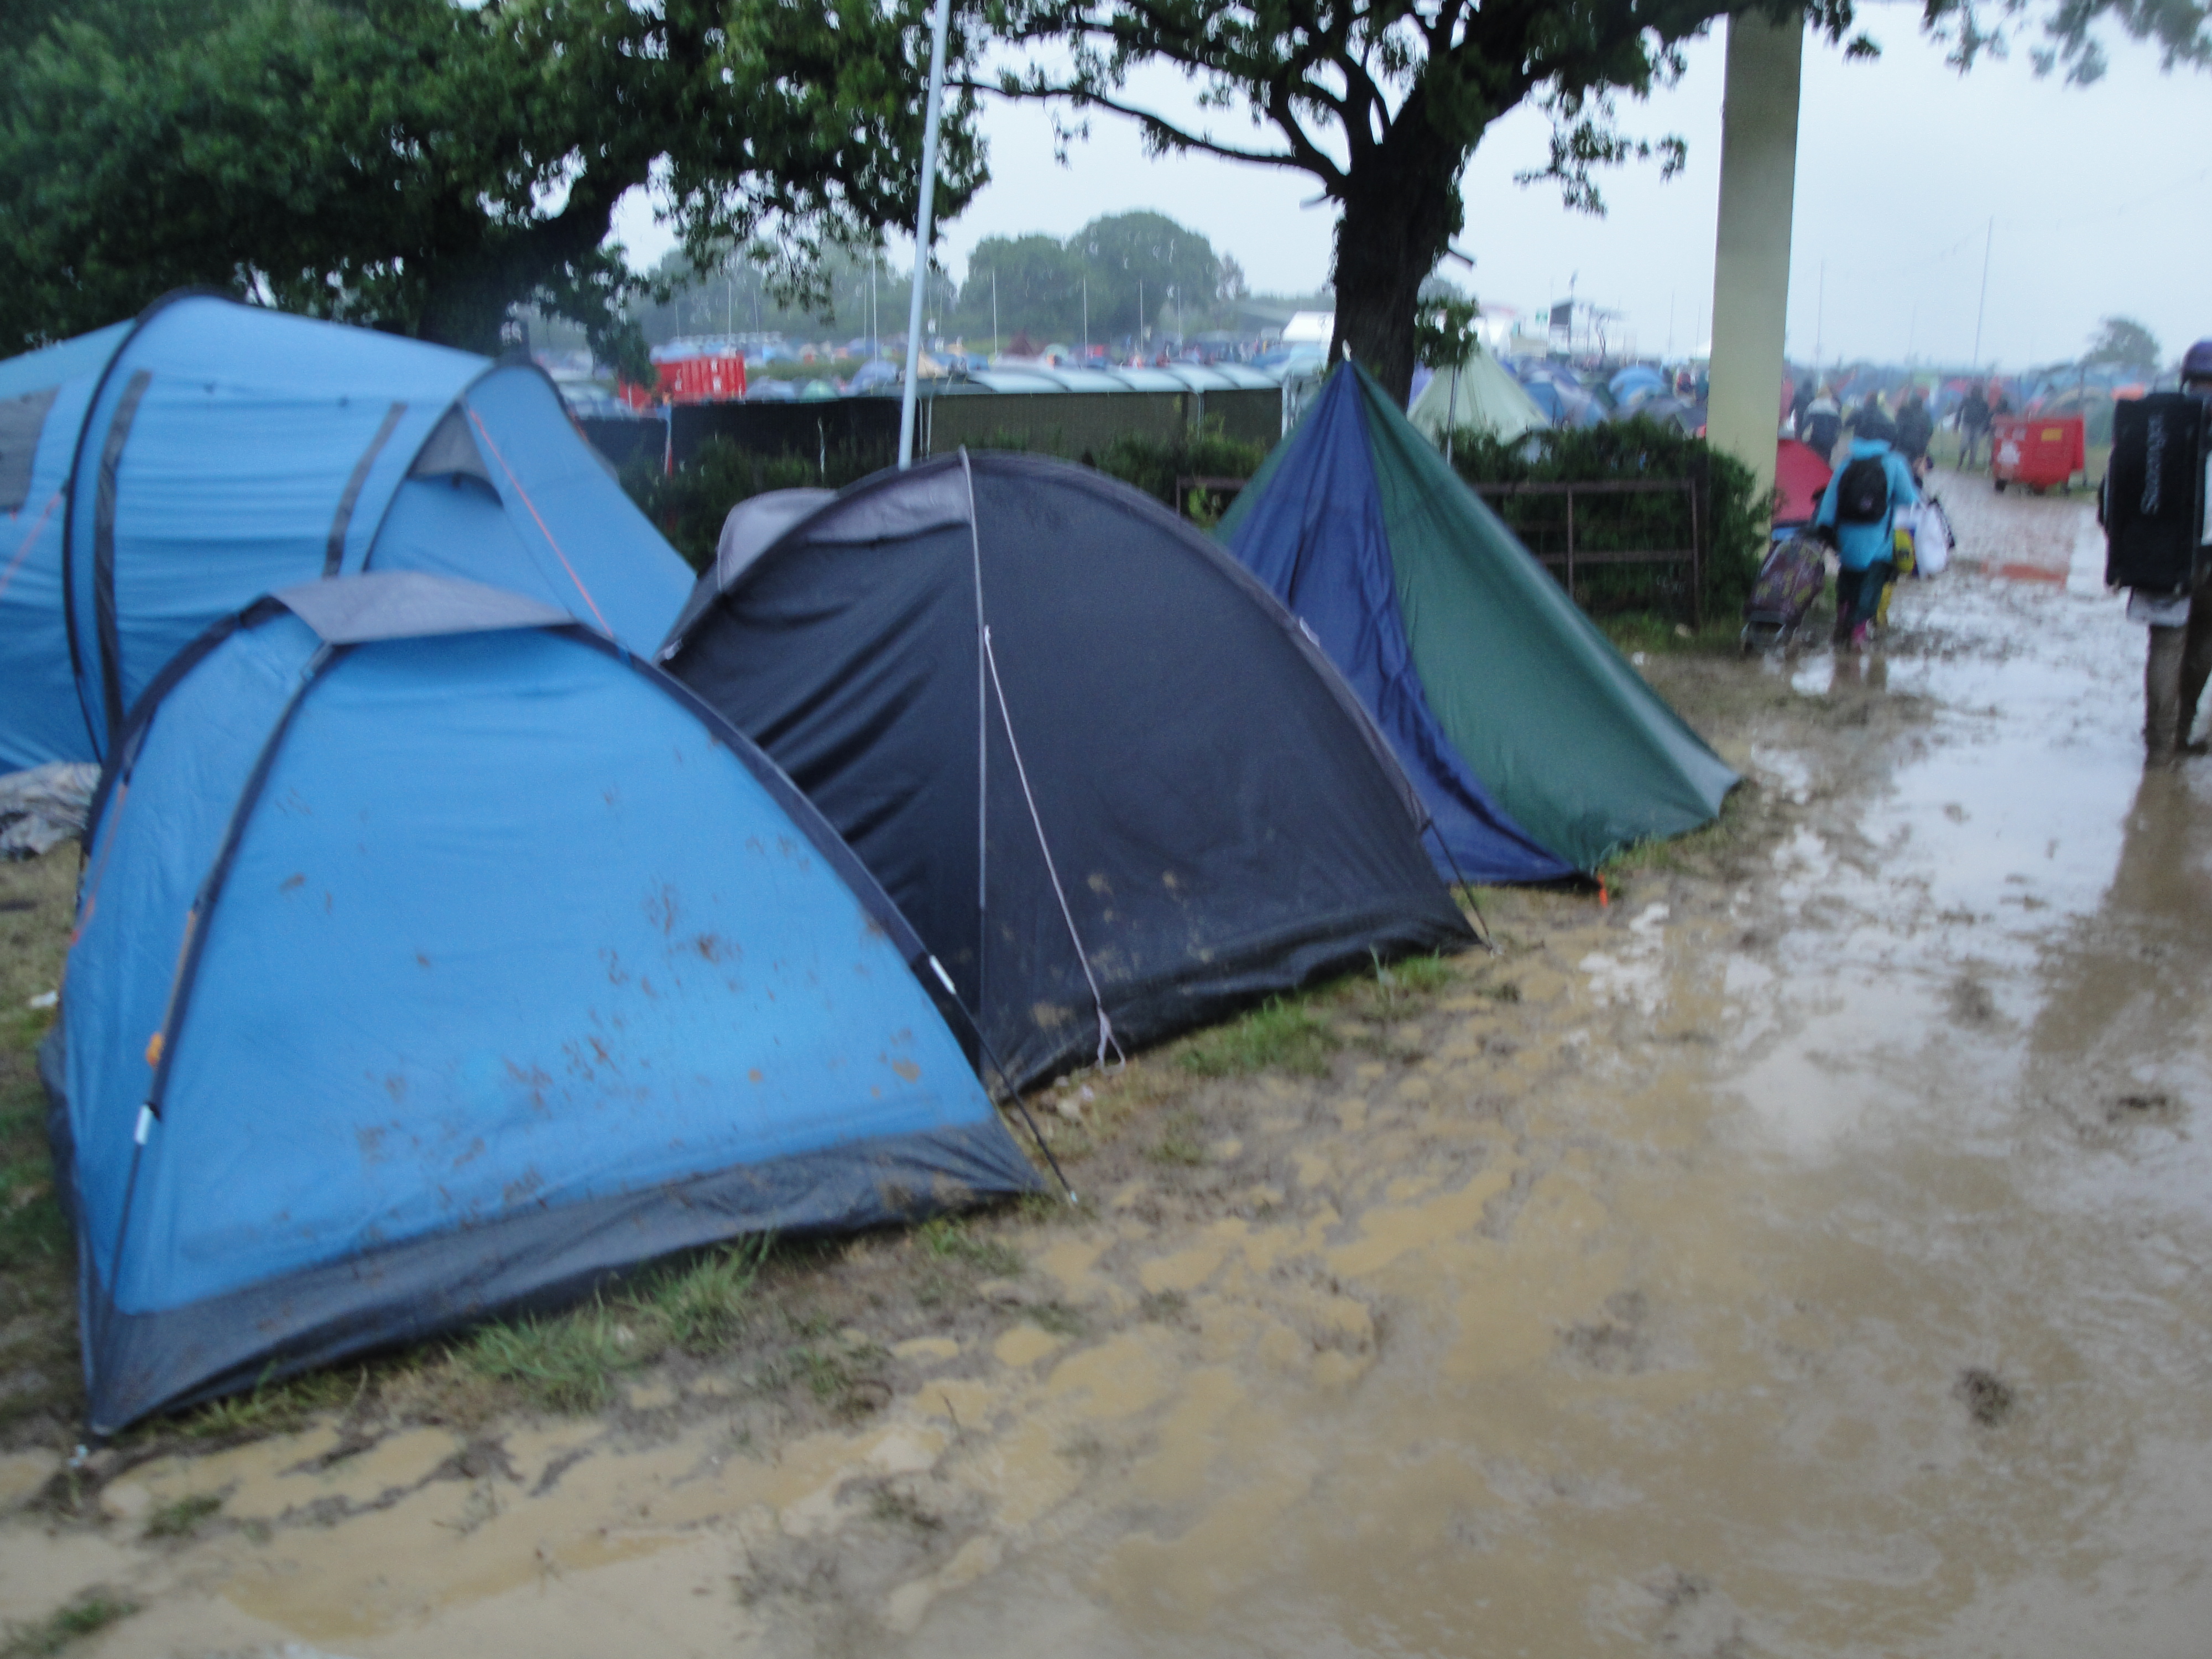 Isle_of_Wight_Festival_2011_campsite_during_bad_weather_2